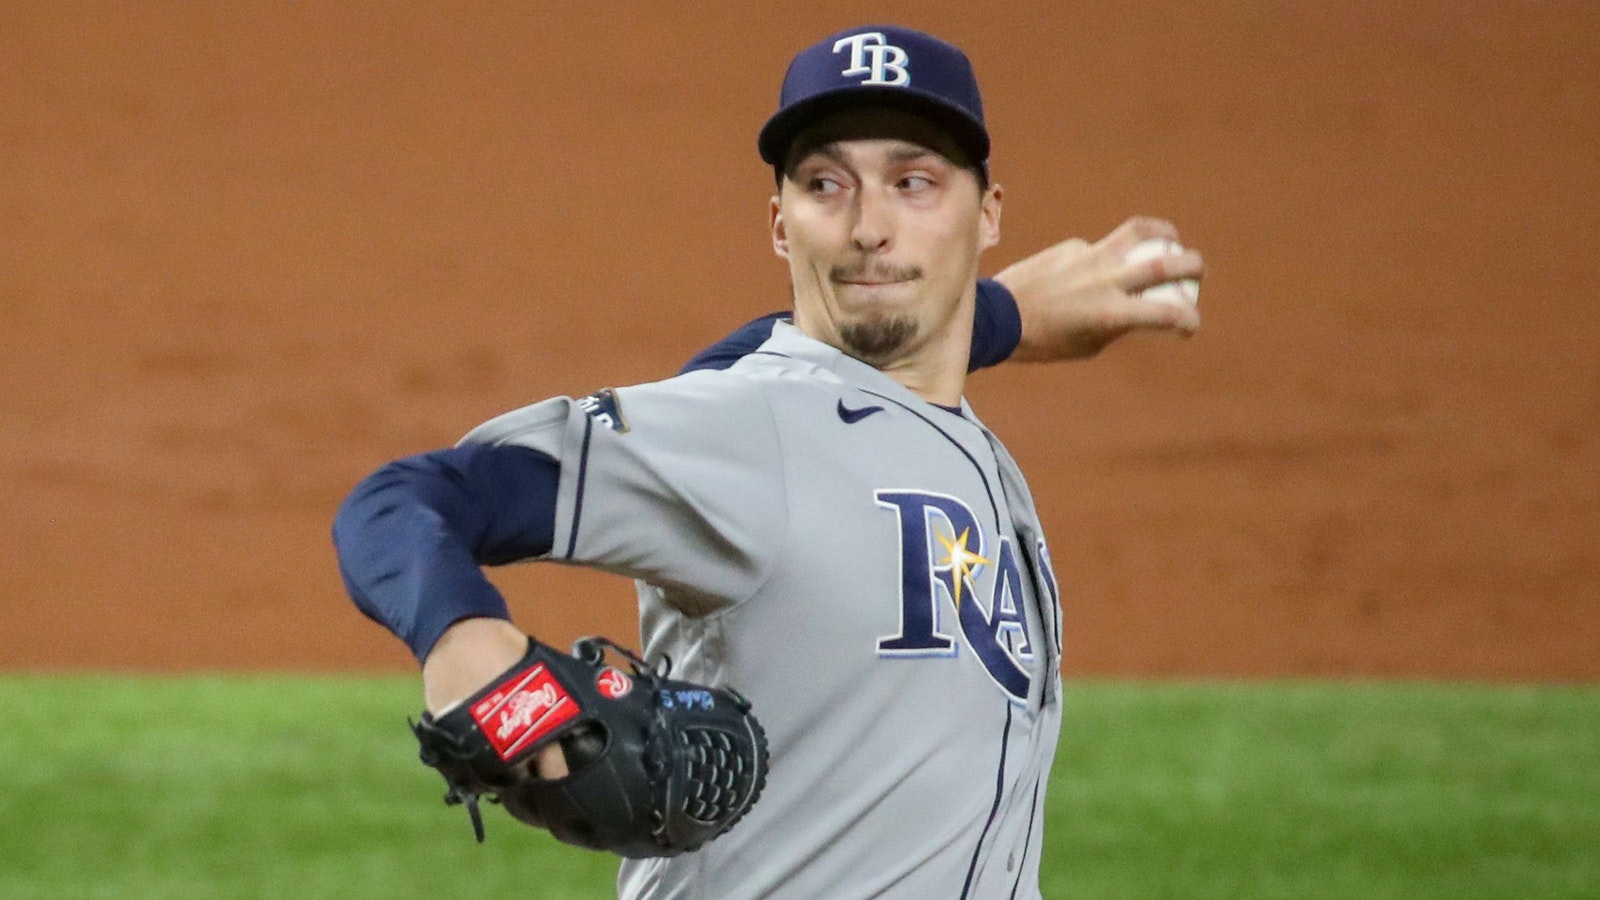 San Diego Padres acquire 2018 Cy Young Award winner Blake Snell from Tampa Bay Rays in five-player contract